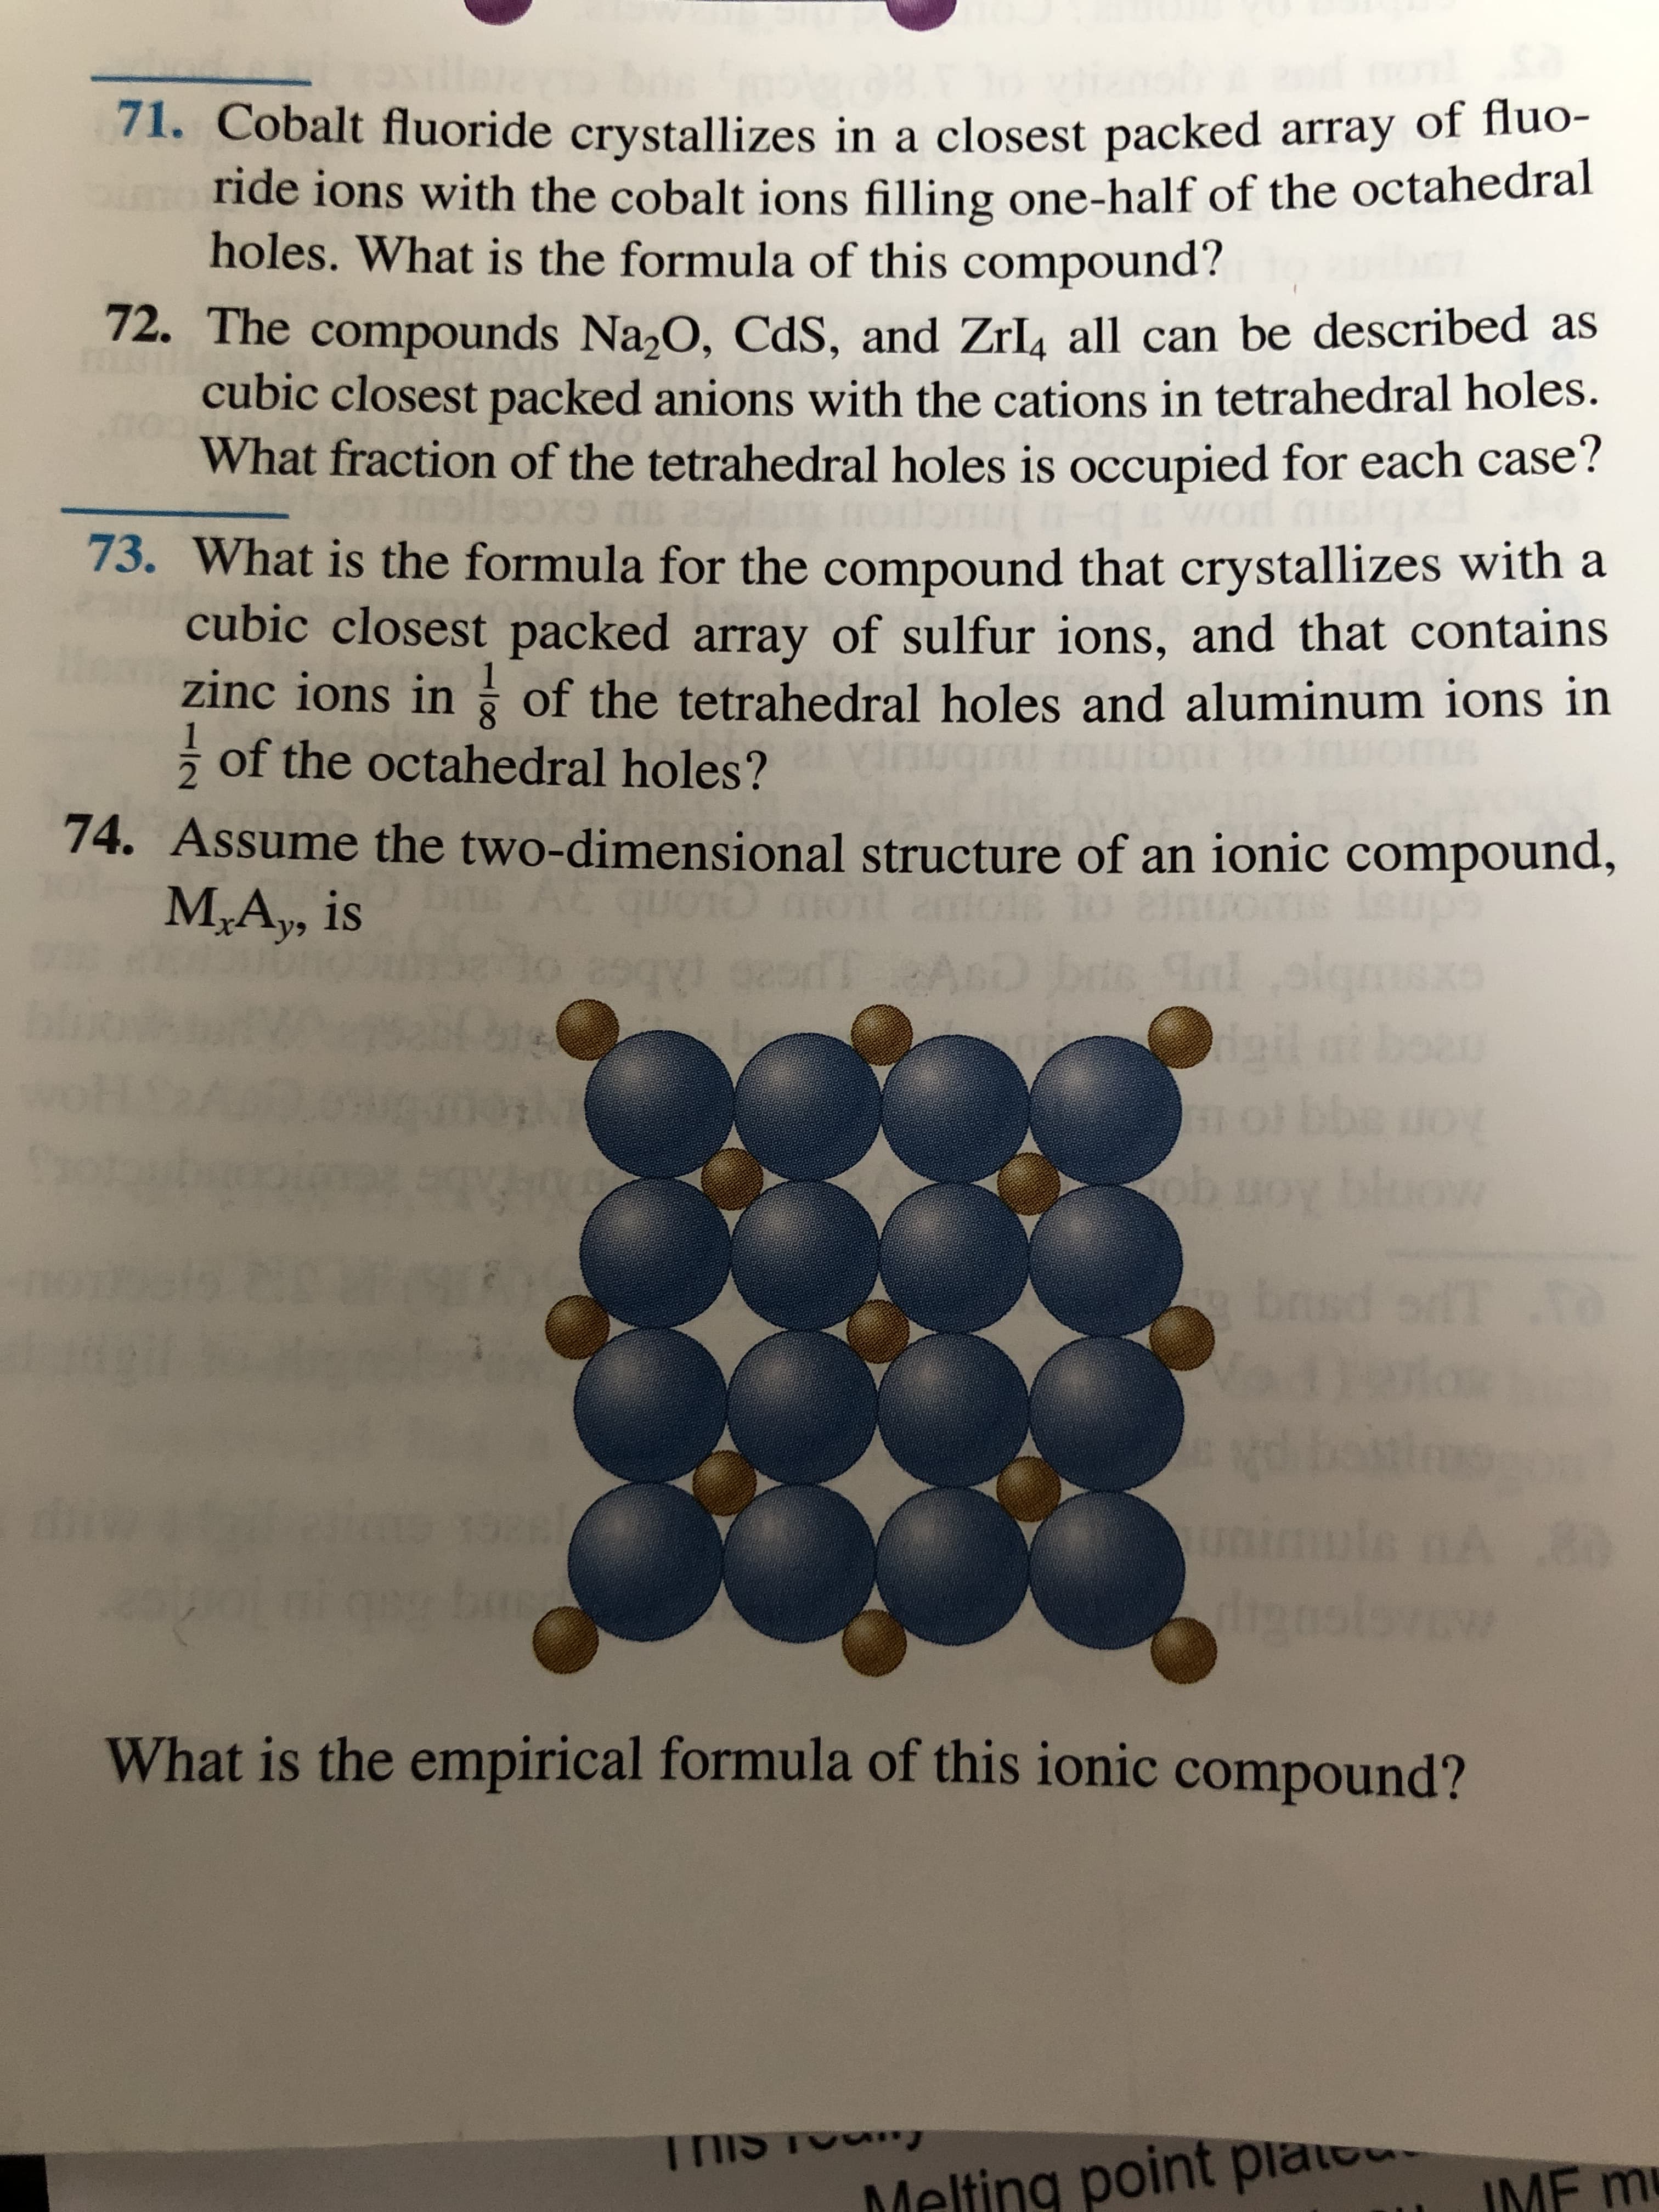 74. Assume the two-dimensional structure of an ionic compound,
M,A,, is
